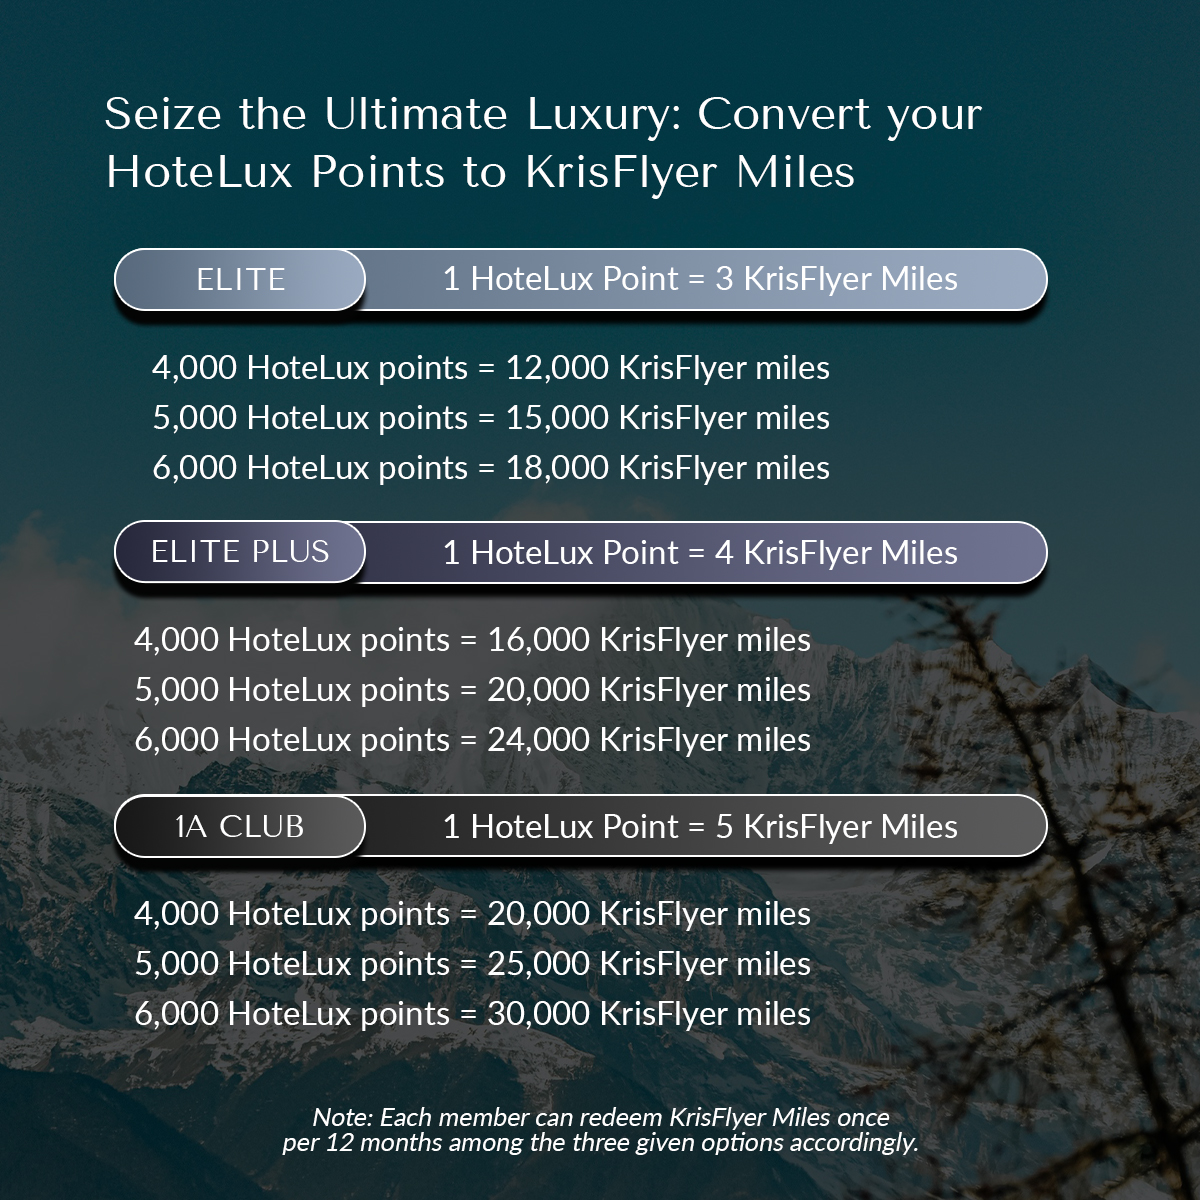 Conversion of HoteLux Points to KrisFlyer Miles